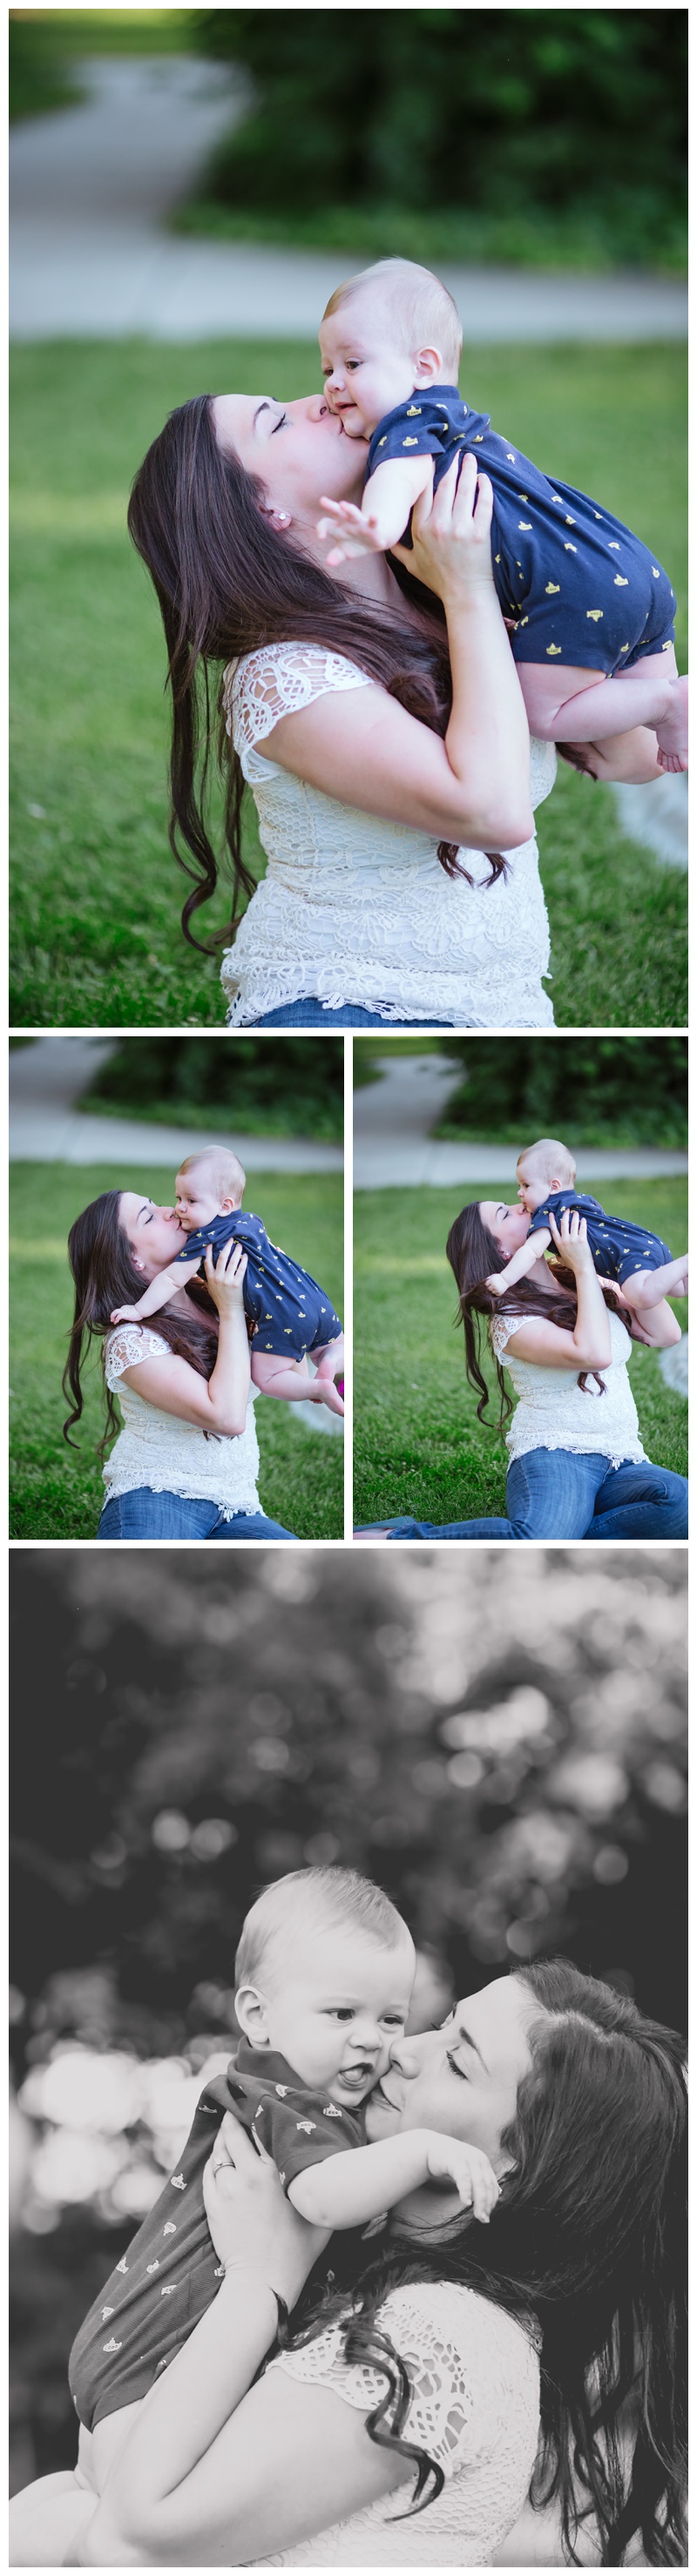 family session, families, Beka Price Photography, family photographer, Murray City Park